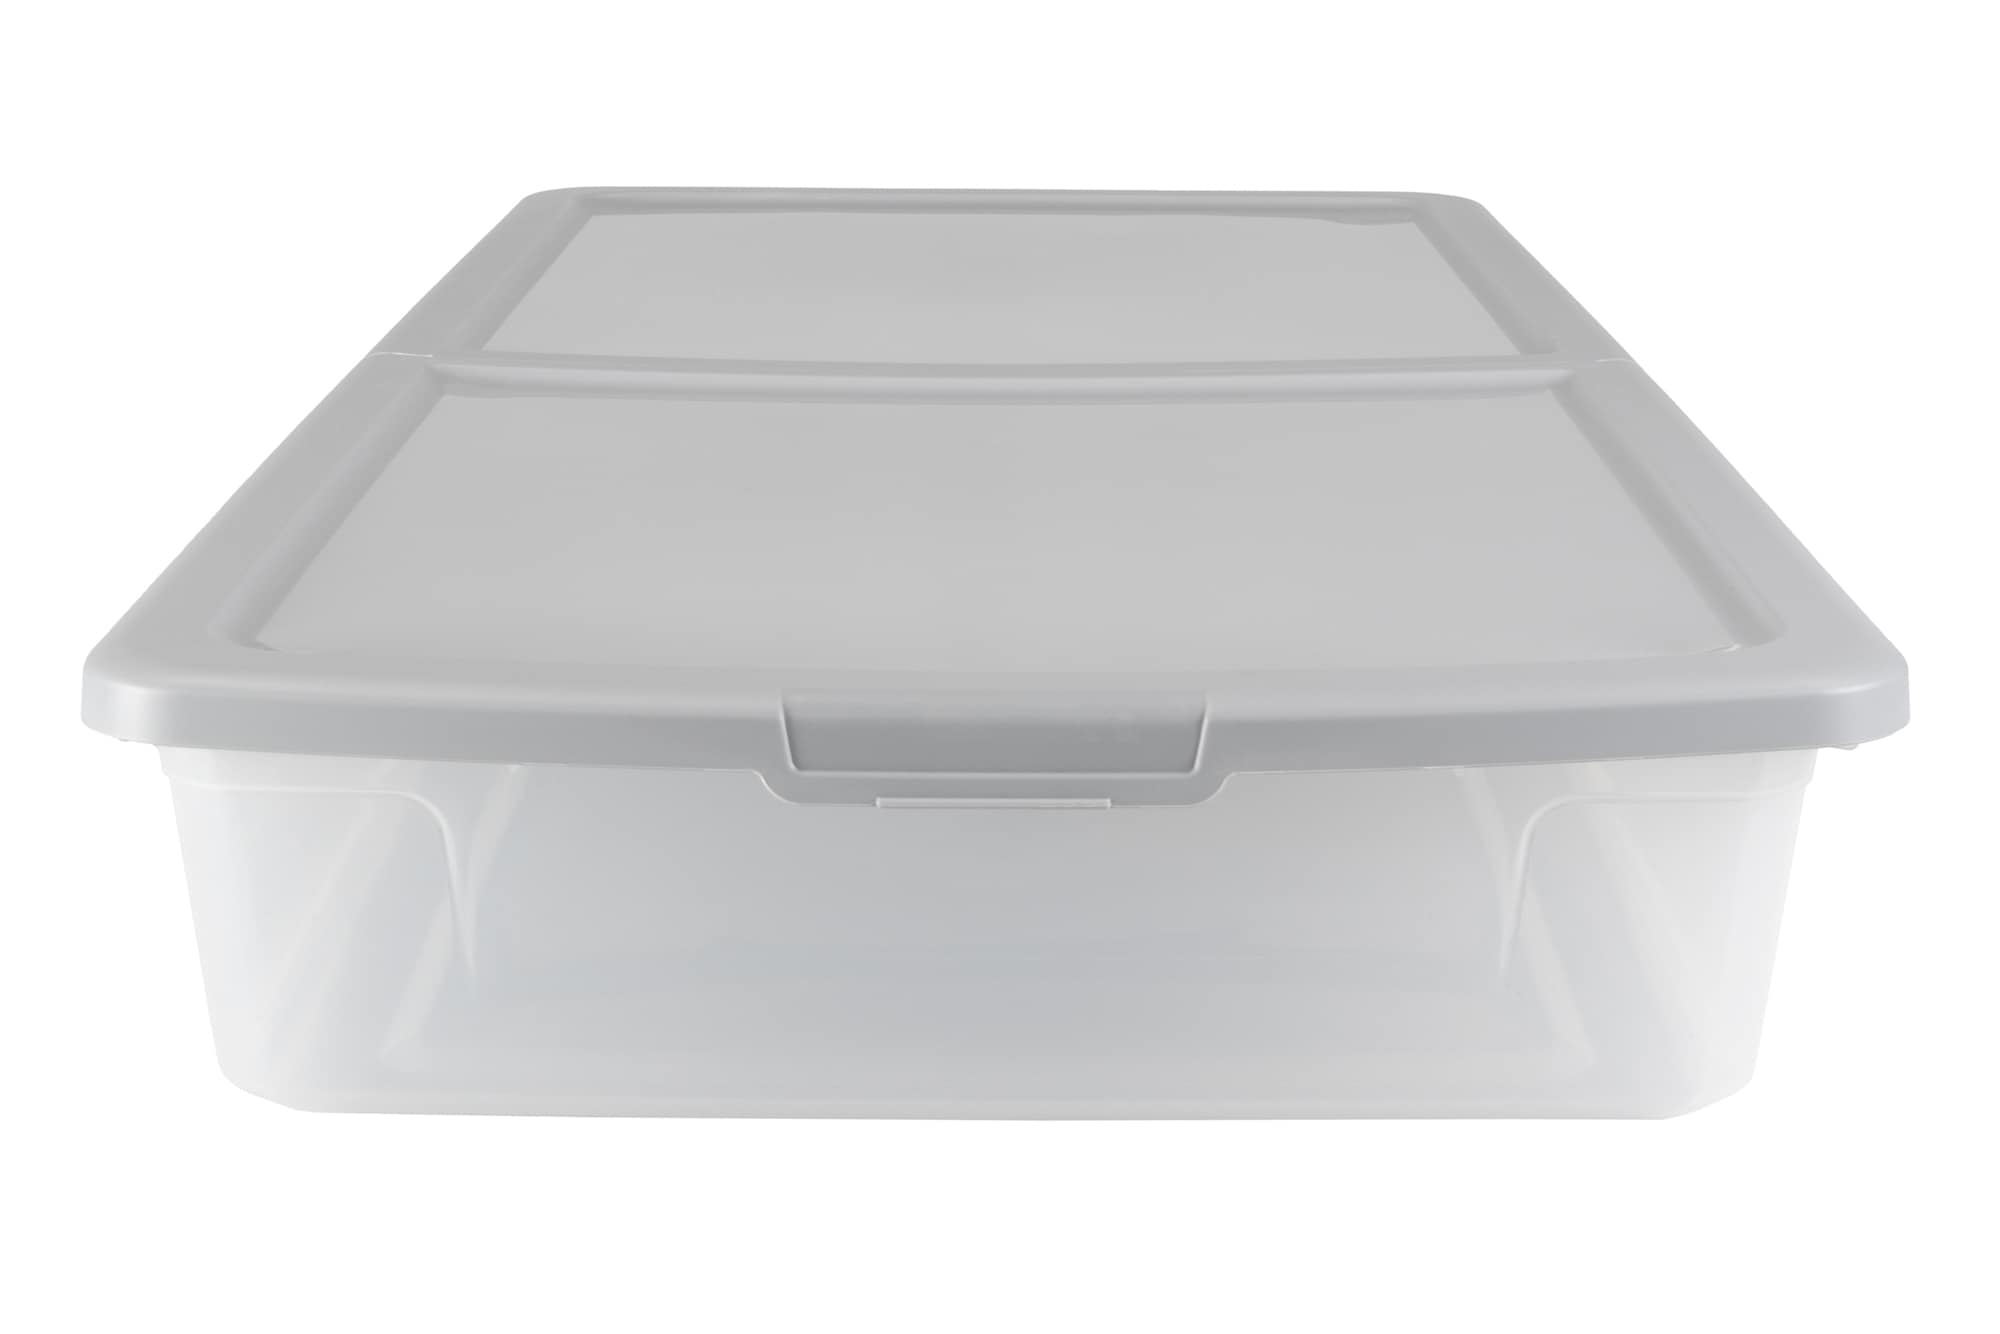 Project Source 17.5-Gallon (70-Quart) Clear Underbed Tote with Standard Snap Lid | 7234-010-522